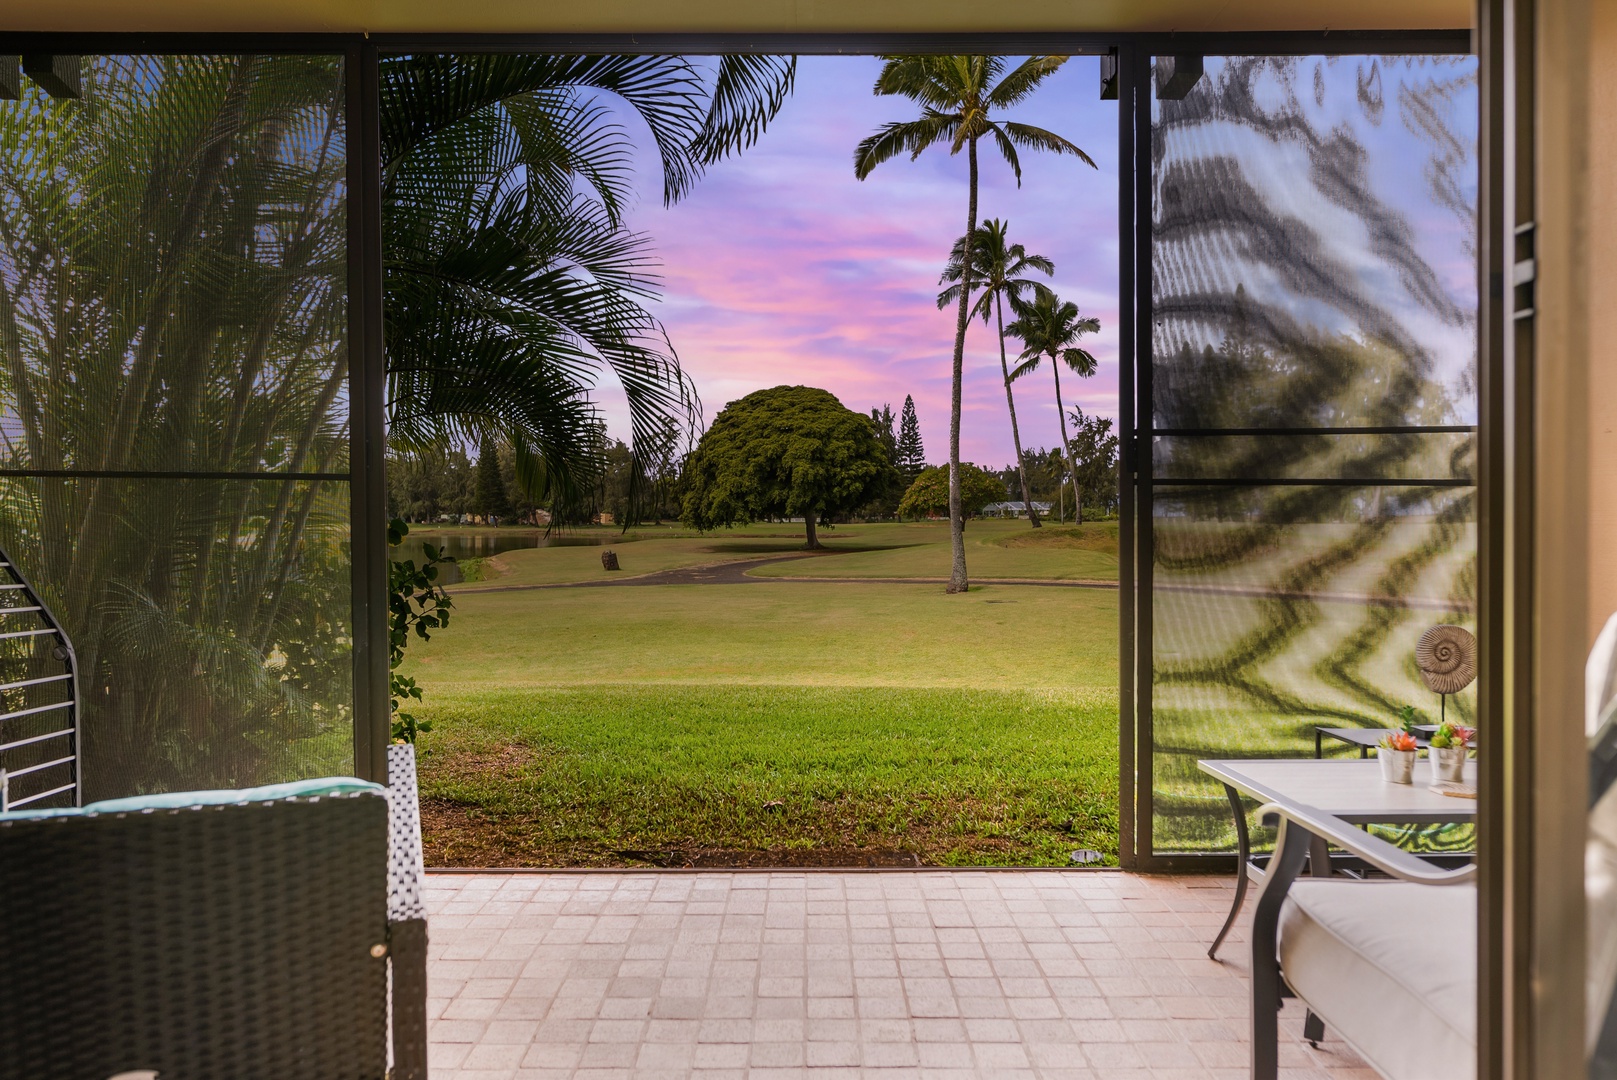 Kahuku Vacation Rentals, Kuilima Estates West #85 - Golf course, stable and sunset views from the comfort of your own lanai.